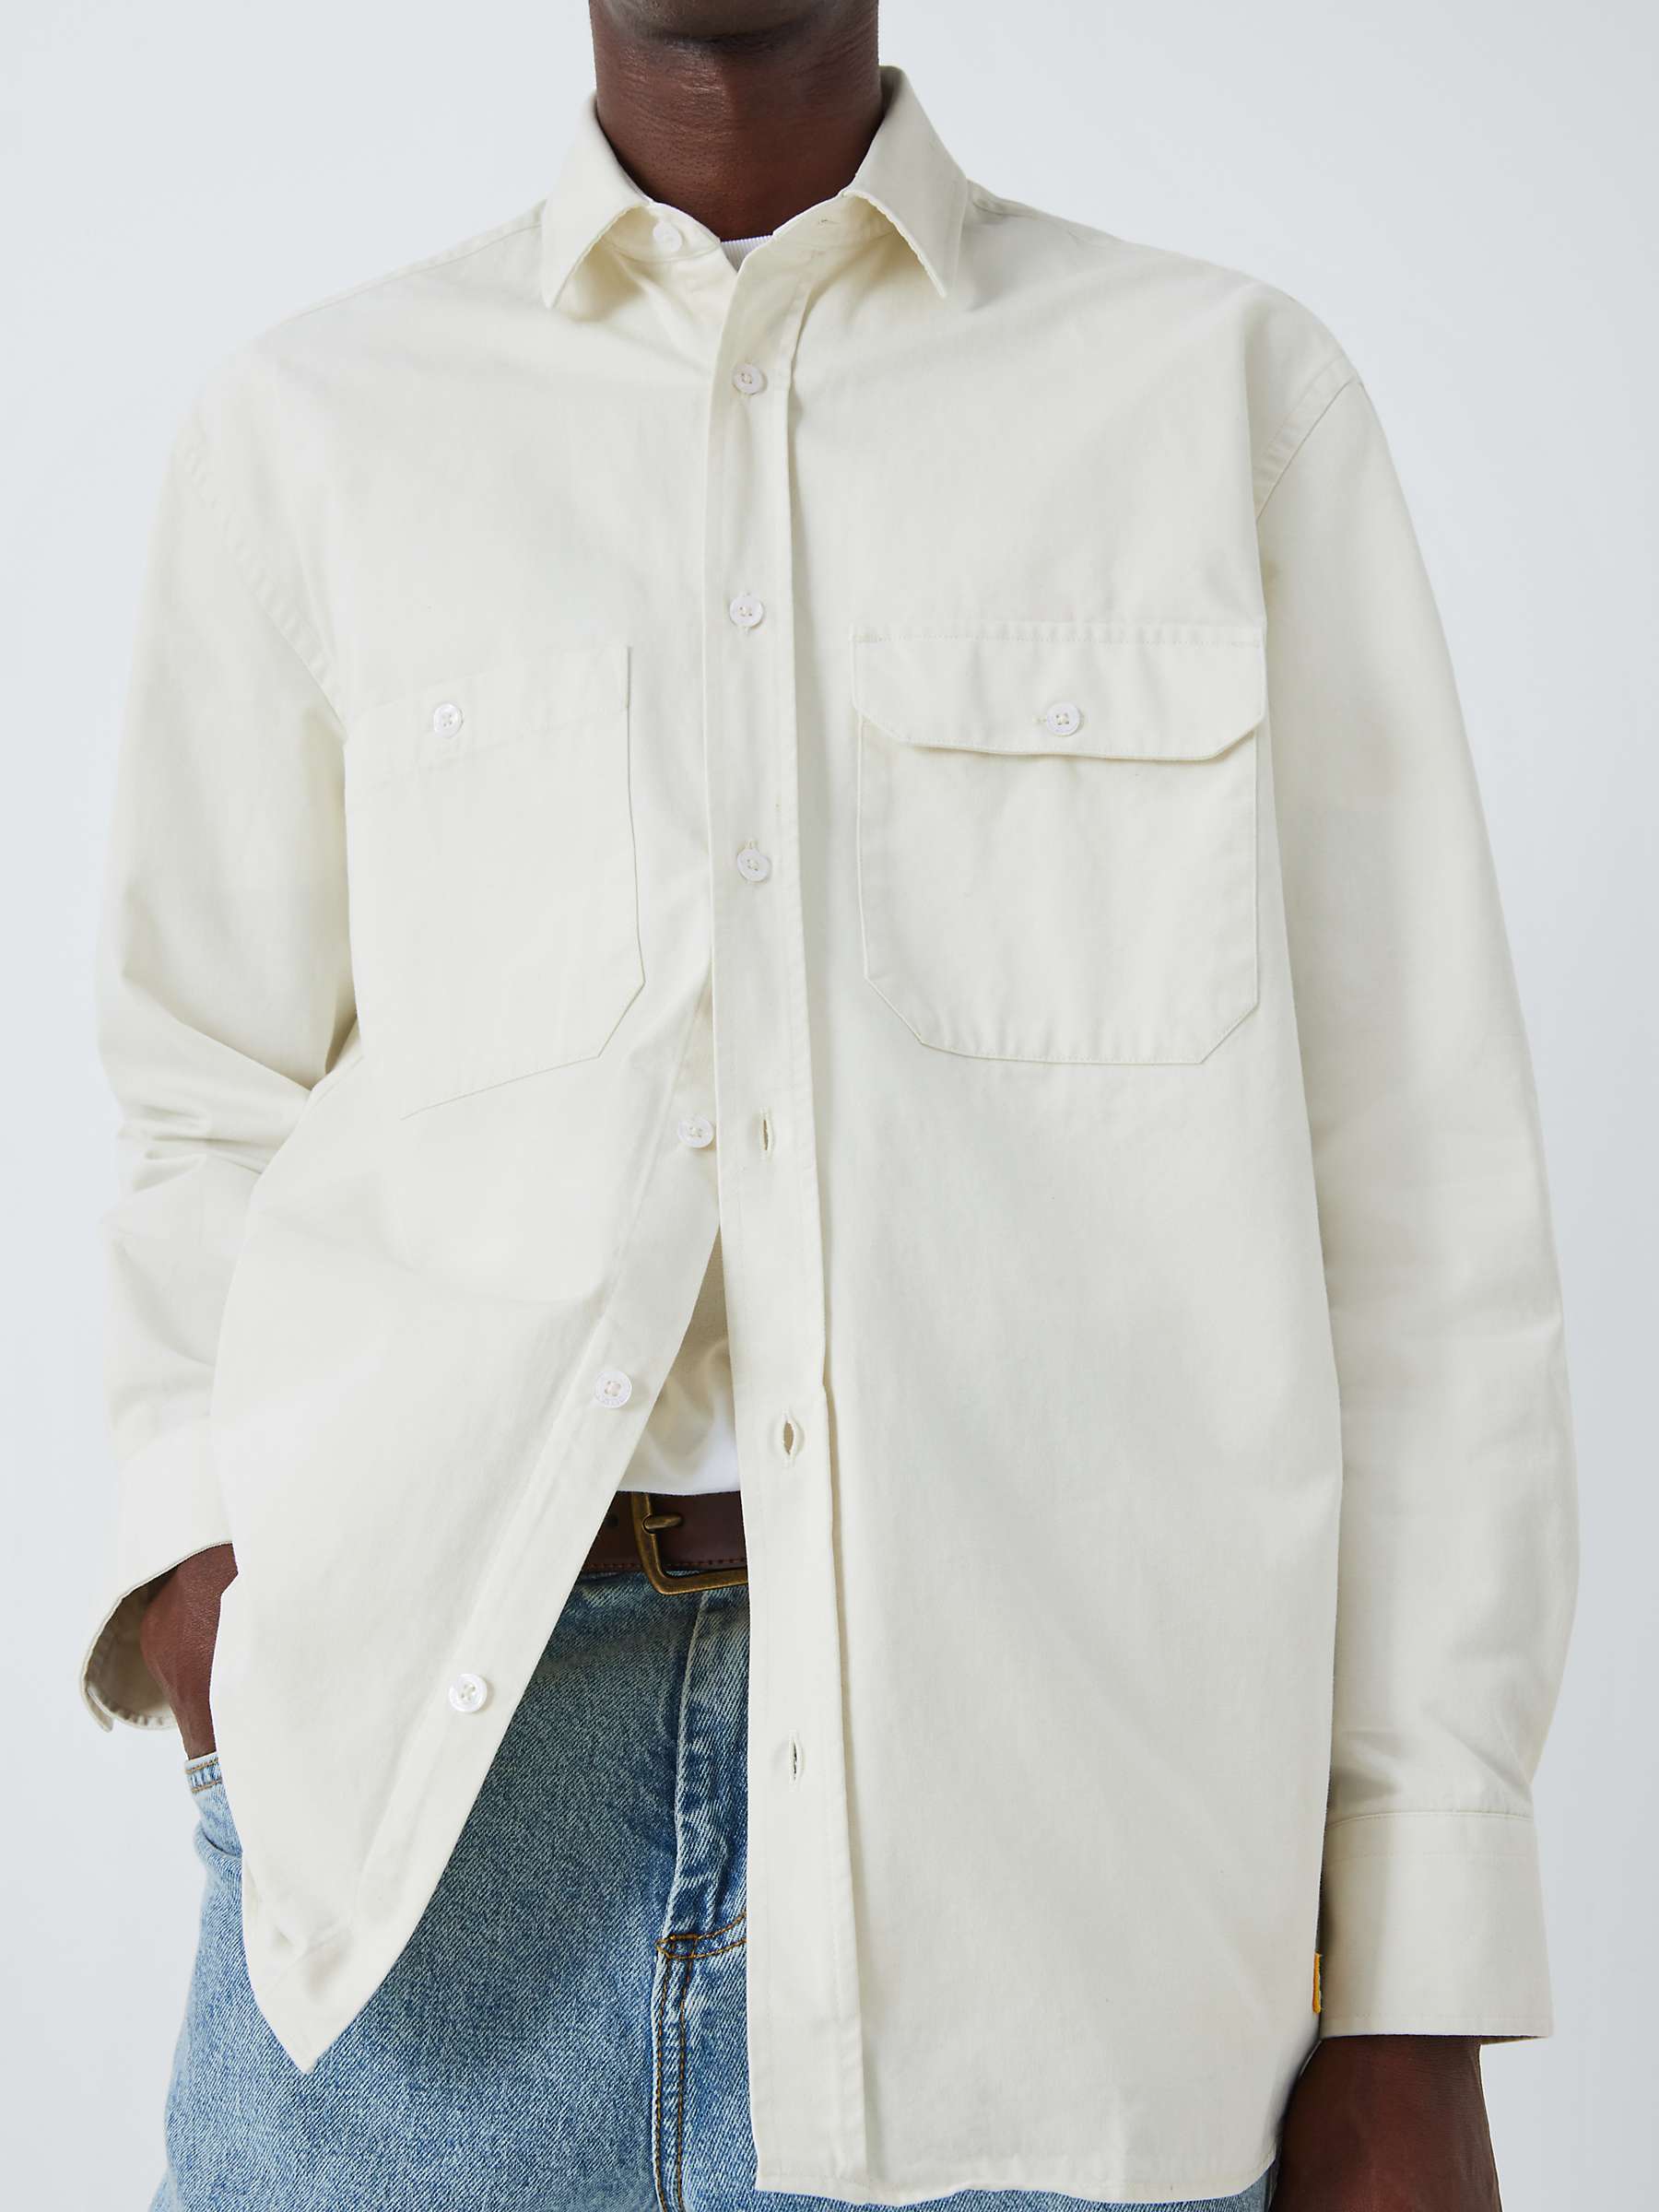 Buy Armor Lux Lightweight Shirt, Oyster Clair Online at johnlewis.com